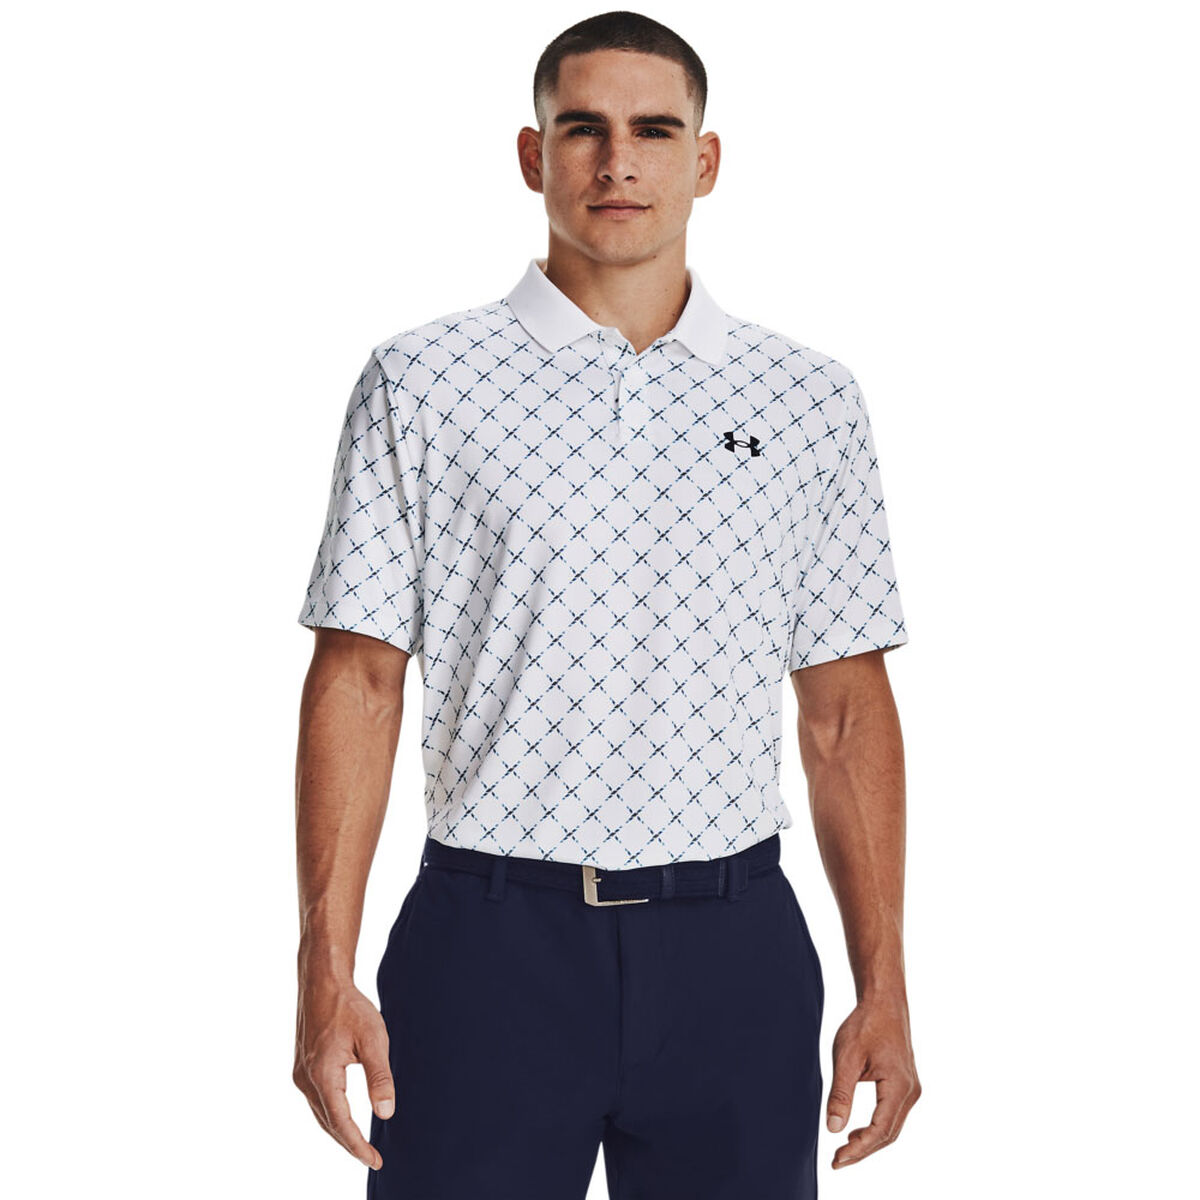 Under Armour Men's White and Navy Blue Performance 3.0 Printed Golf Polo Shirt, Size: Small | American Golf von Under Armour